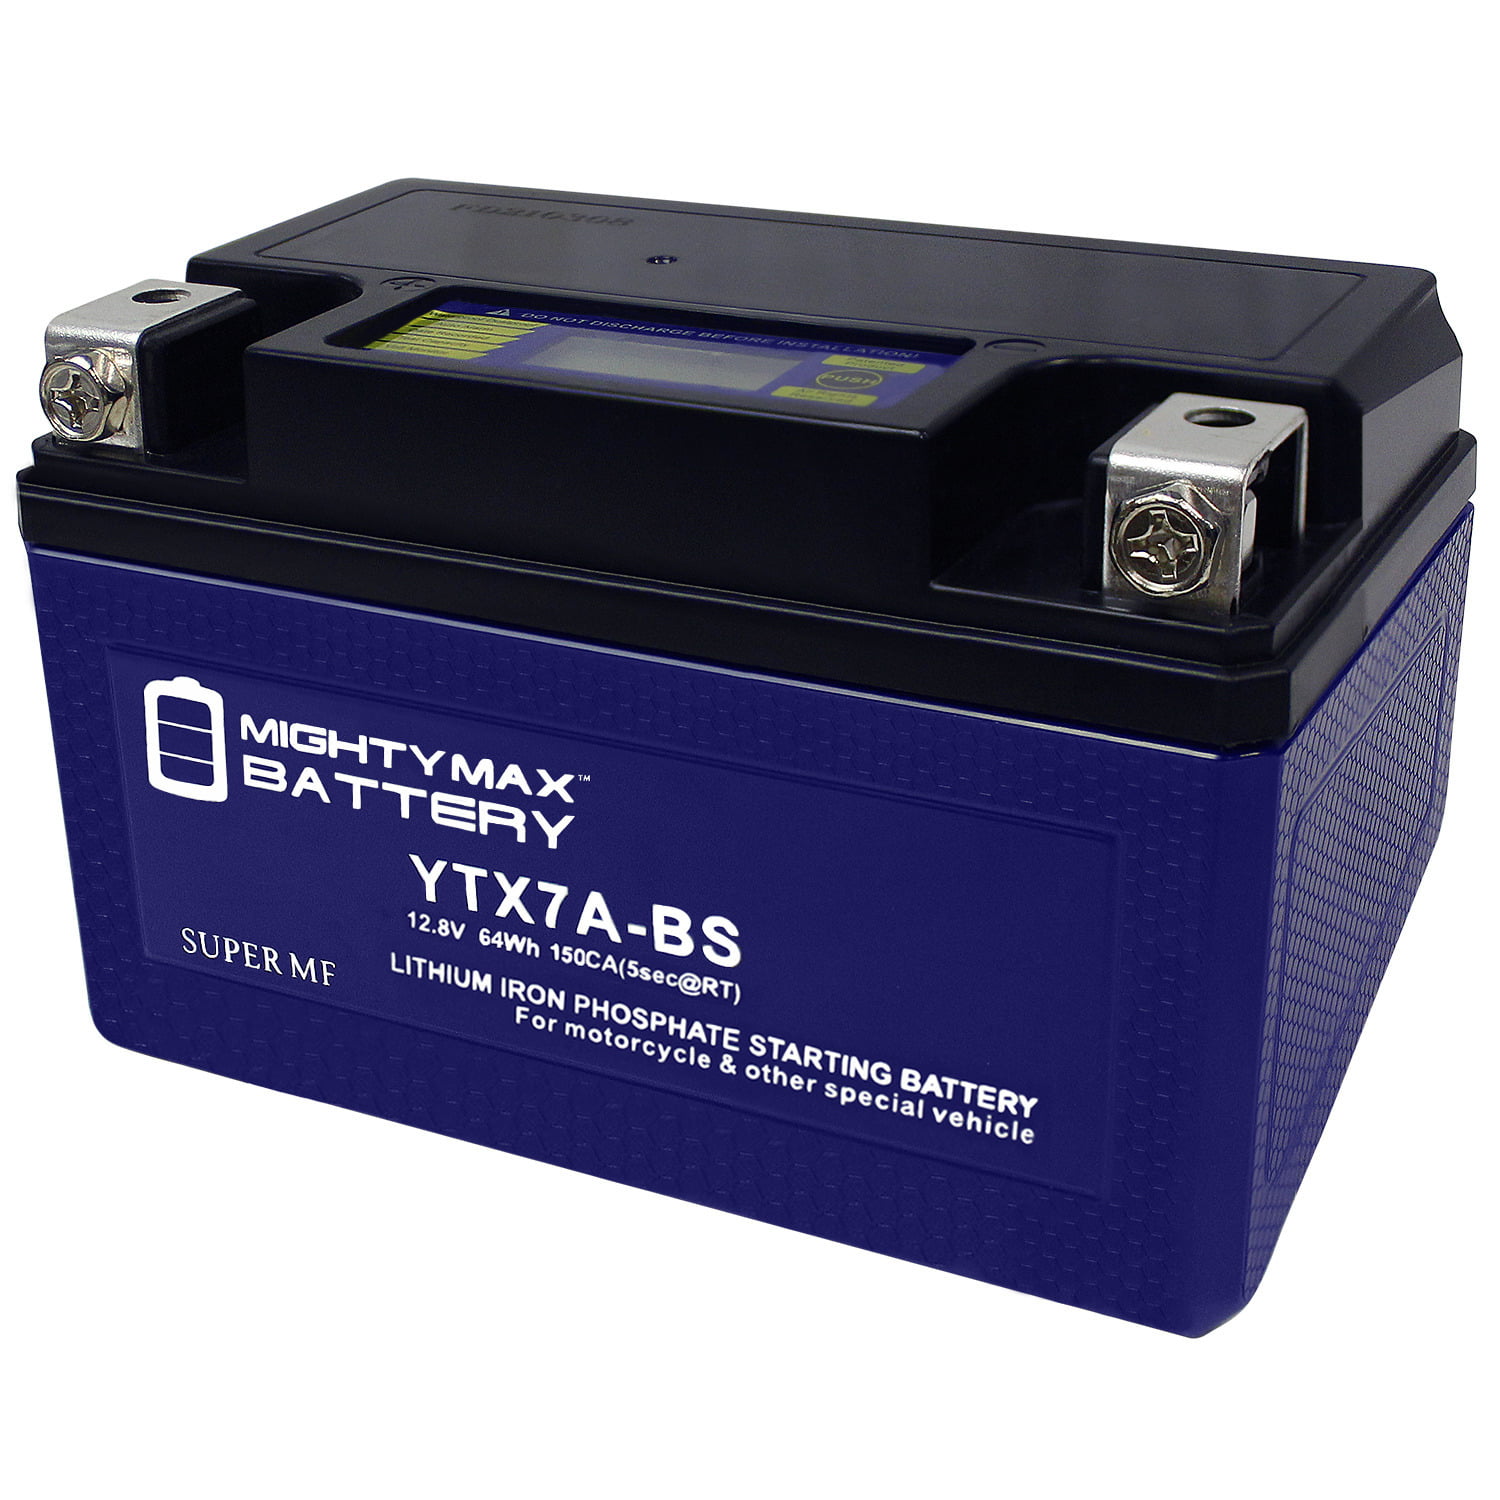 Peugeot 125 Sum-Up 2008-11 Shido Battery LTX7A-BS Lithium Ion YTX7A-BS 